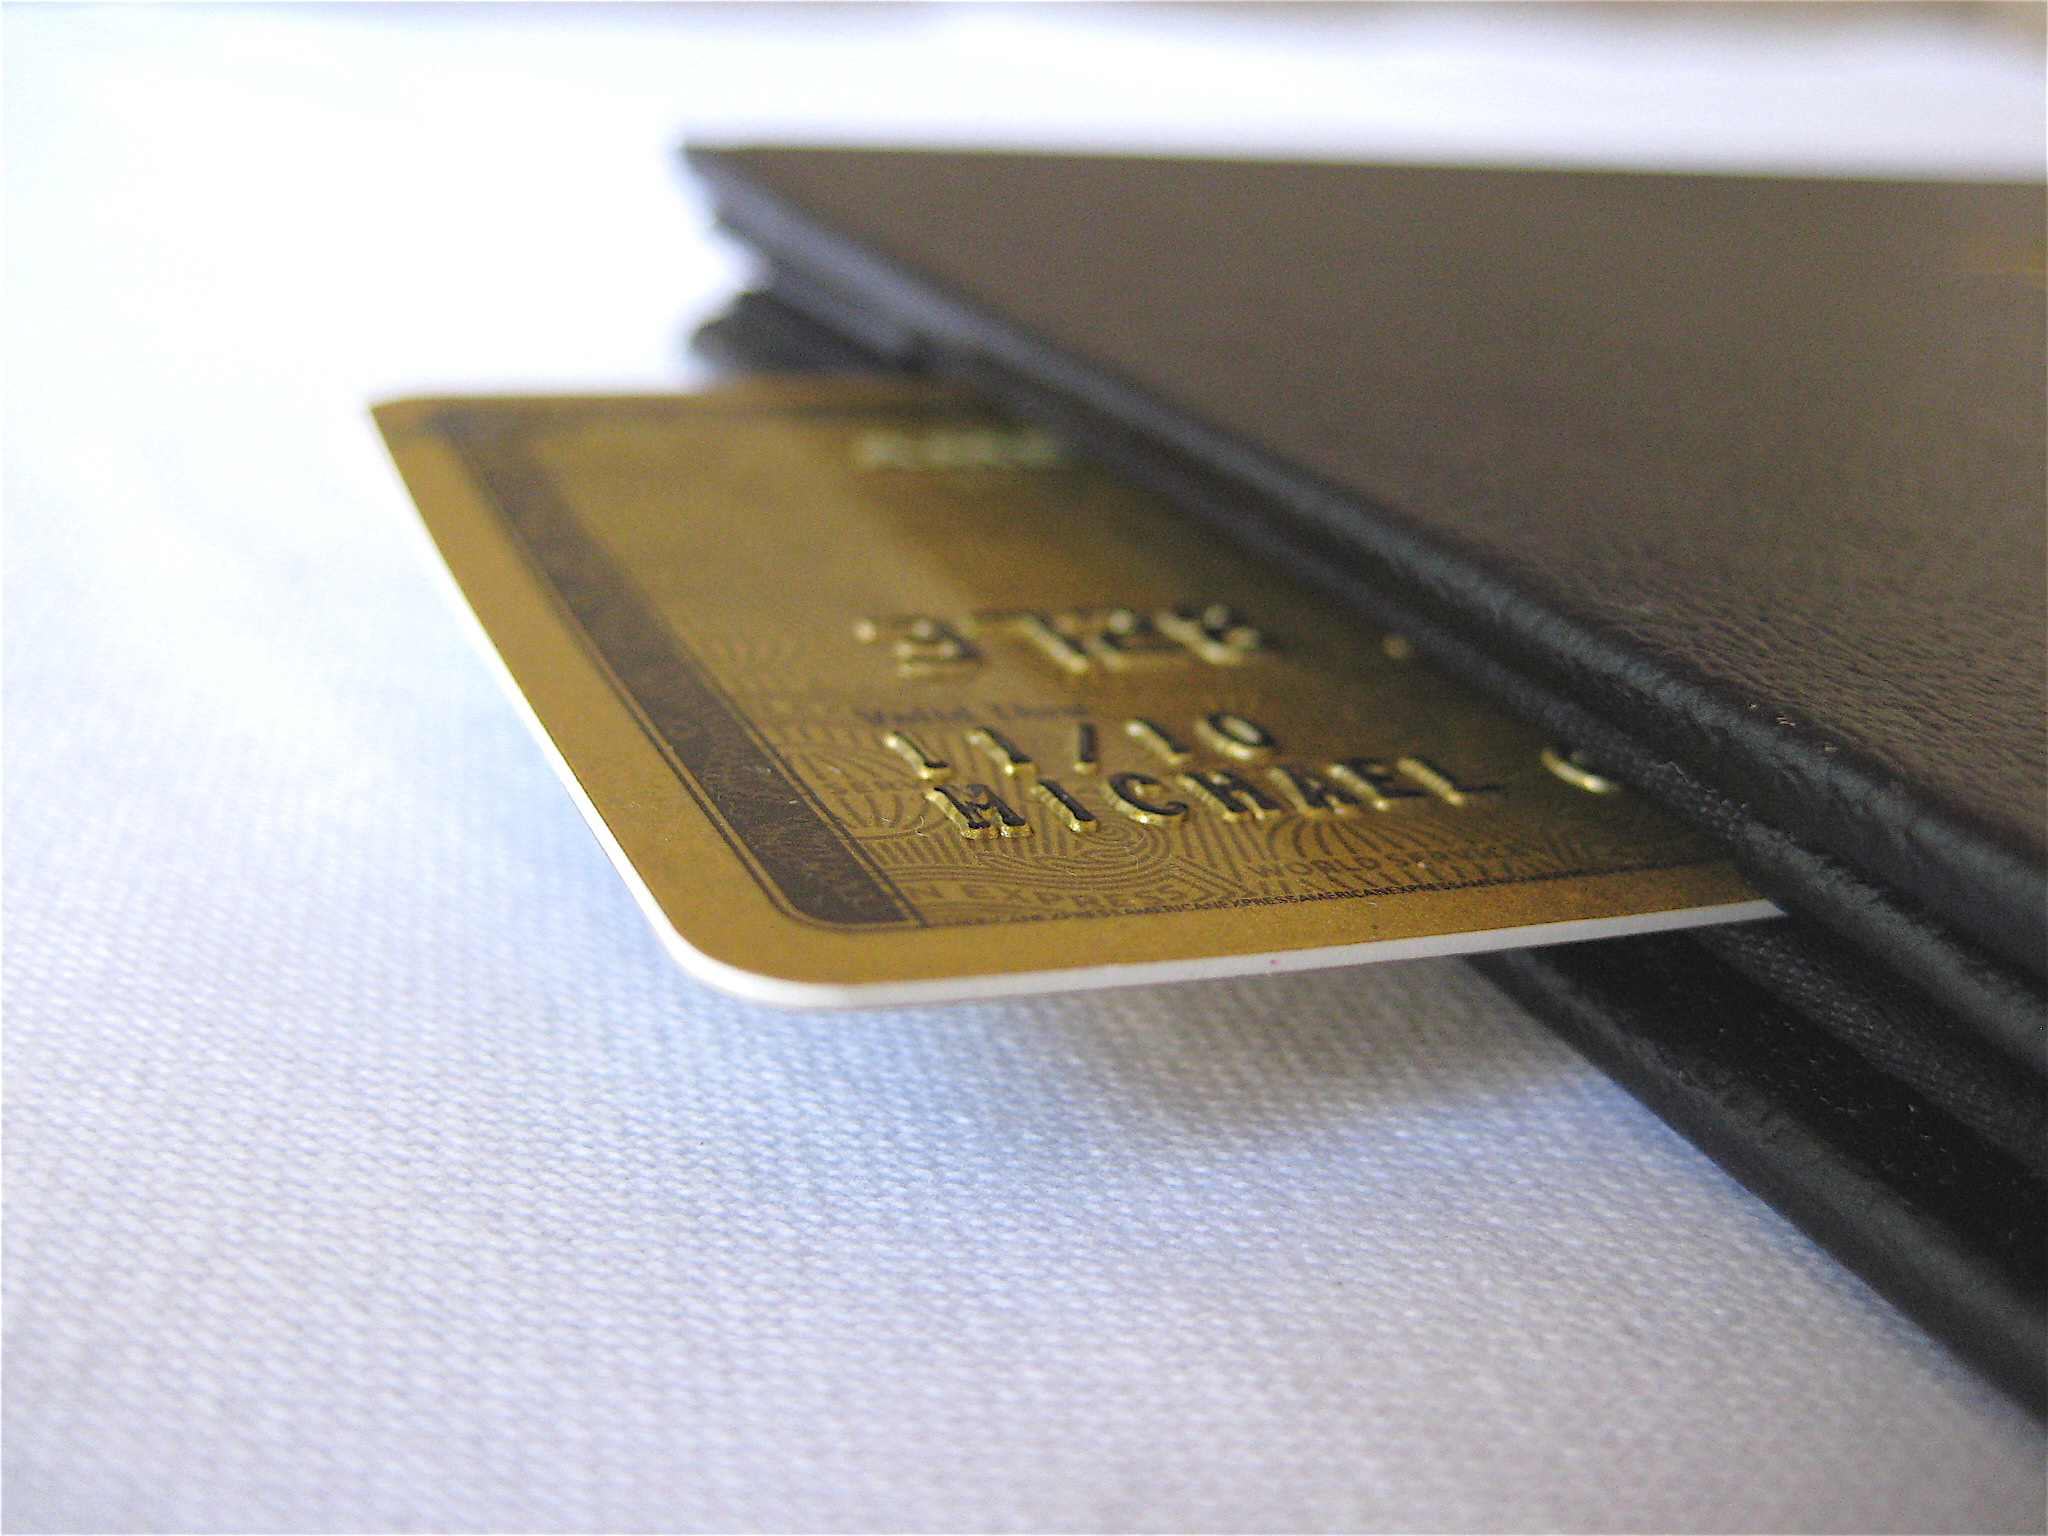 DT Black Cards >>> Amex Black Cards⁠ ⁠ Here's how to get your own